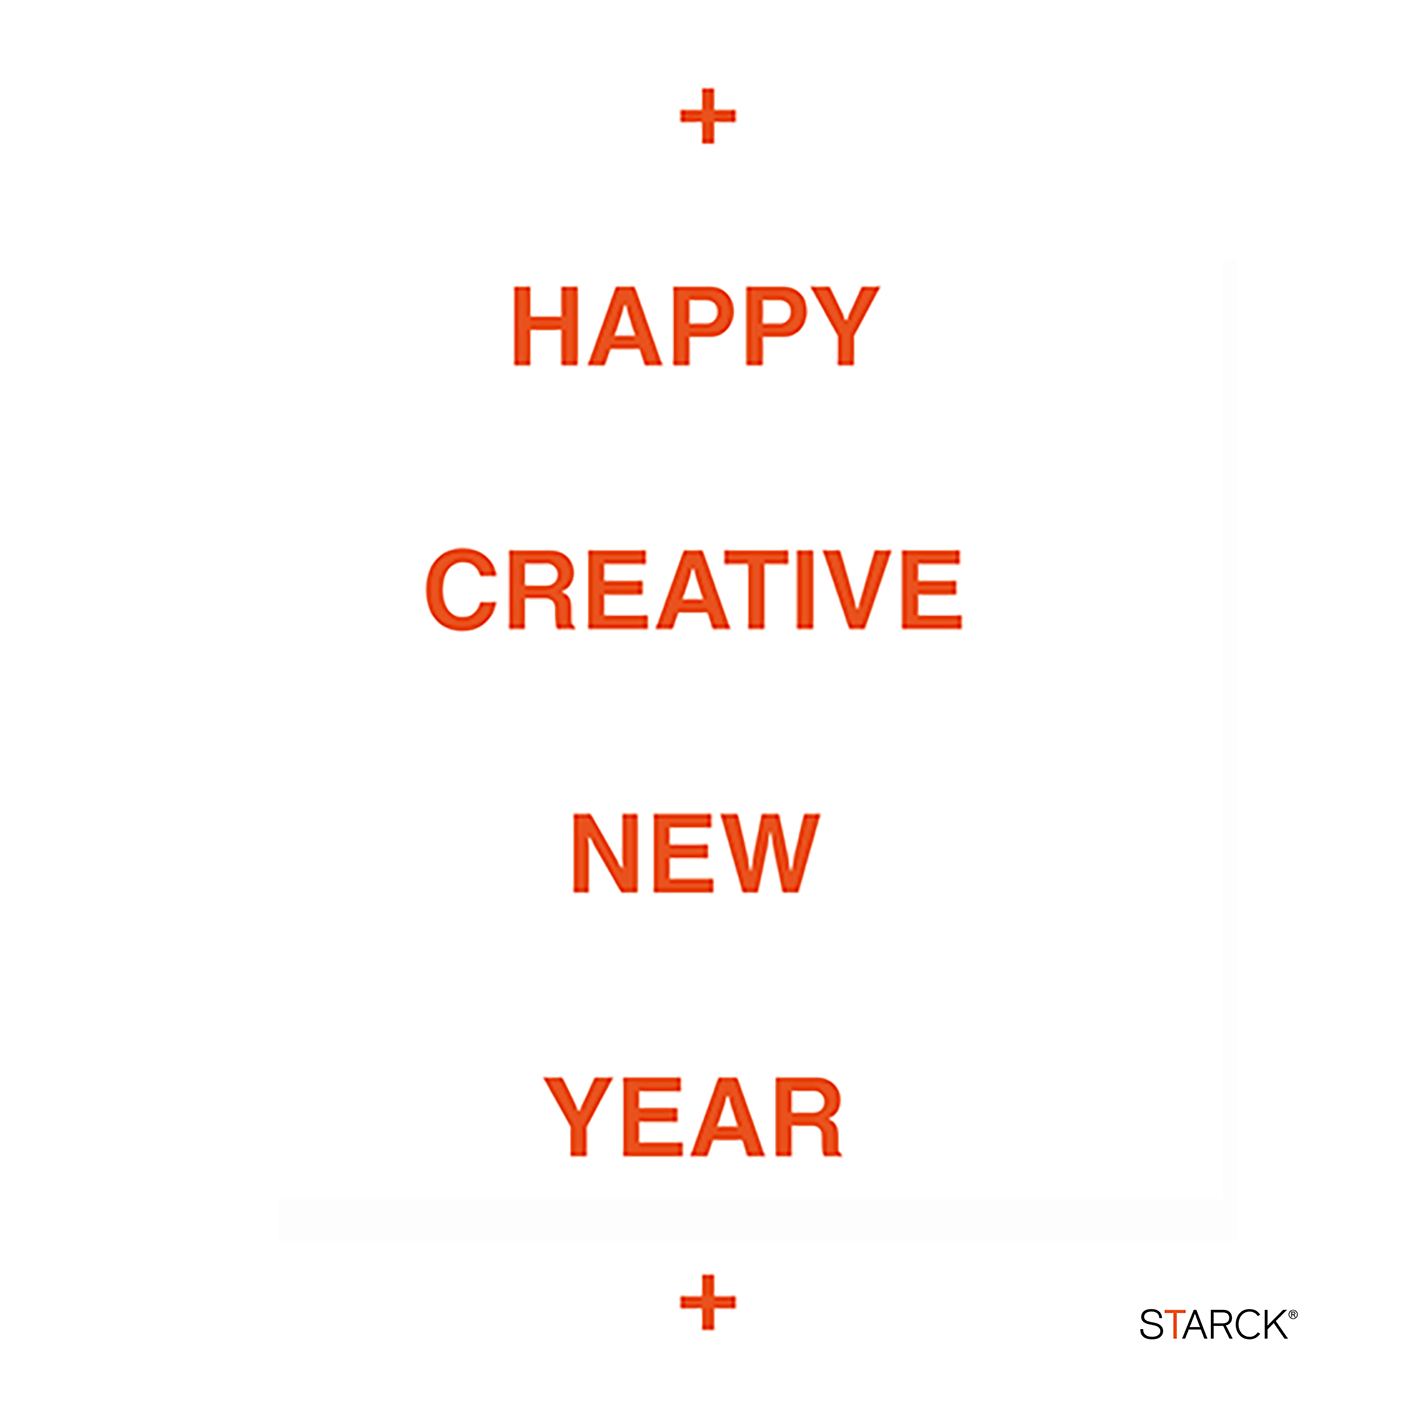 LET’S HAVE AN EVEN MORE CREATIVE NEW YEAR   - 